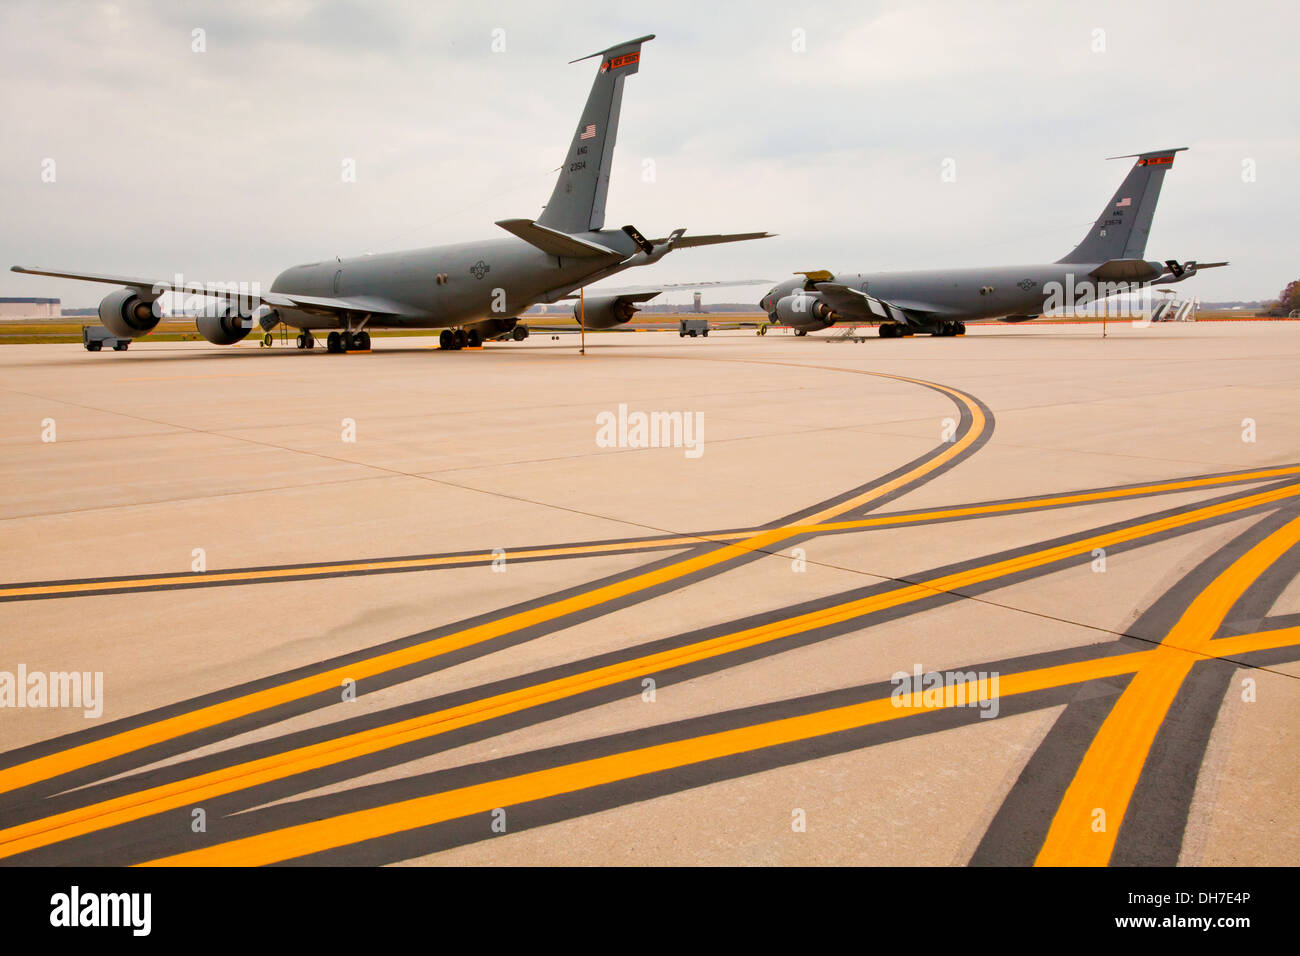 KC-135R Stratotankers assigned to the 108th Wing, New Jersey Air National Guard, at Joint Base McGuire-Dix-Lakehurst, N.J., Oct. 31, 2013. Stock Photo